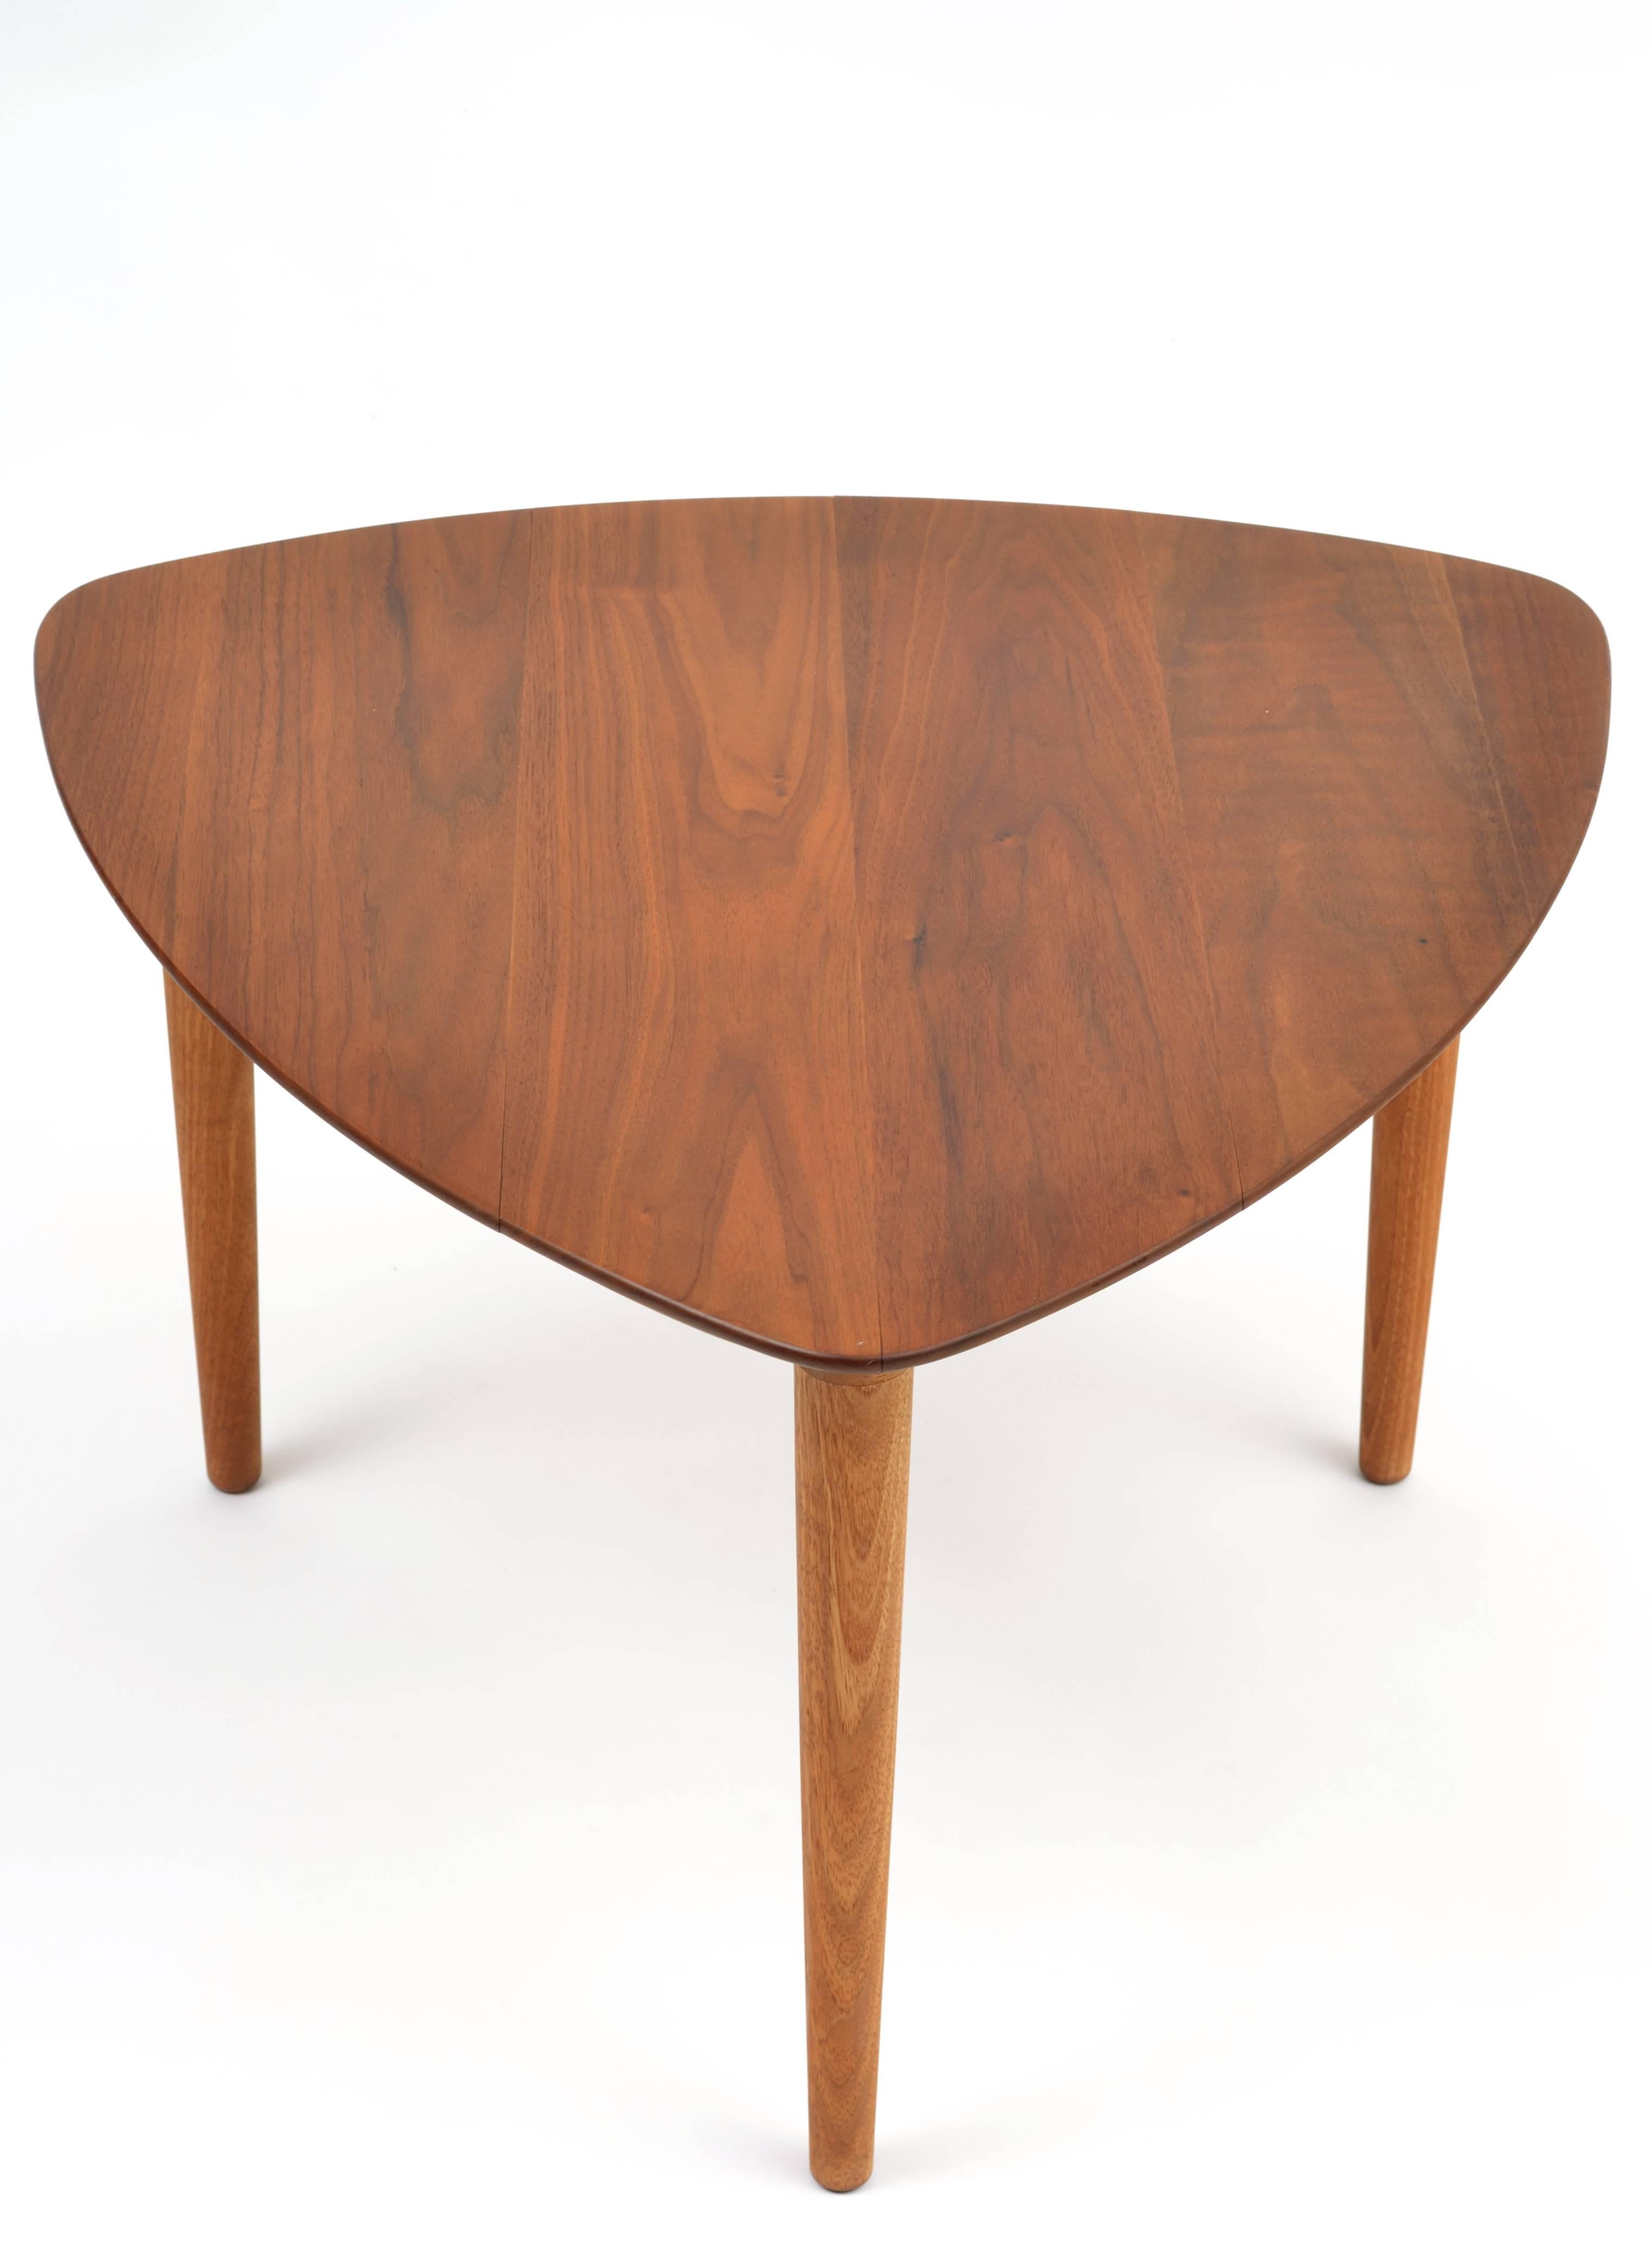 Mid-20th Century Danish Style Walnut Side Table Attributed to Jerry Glaser For Sale